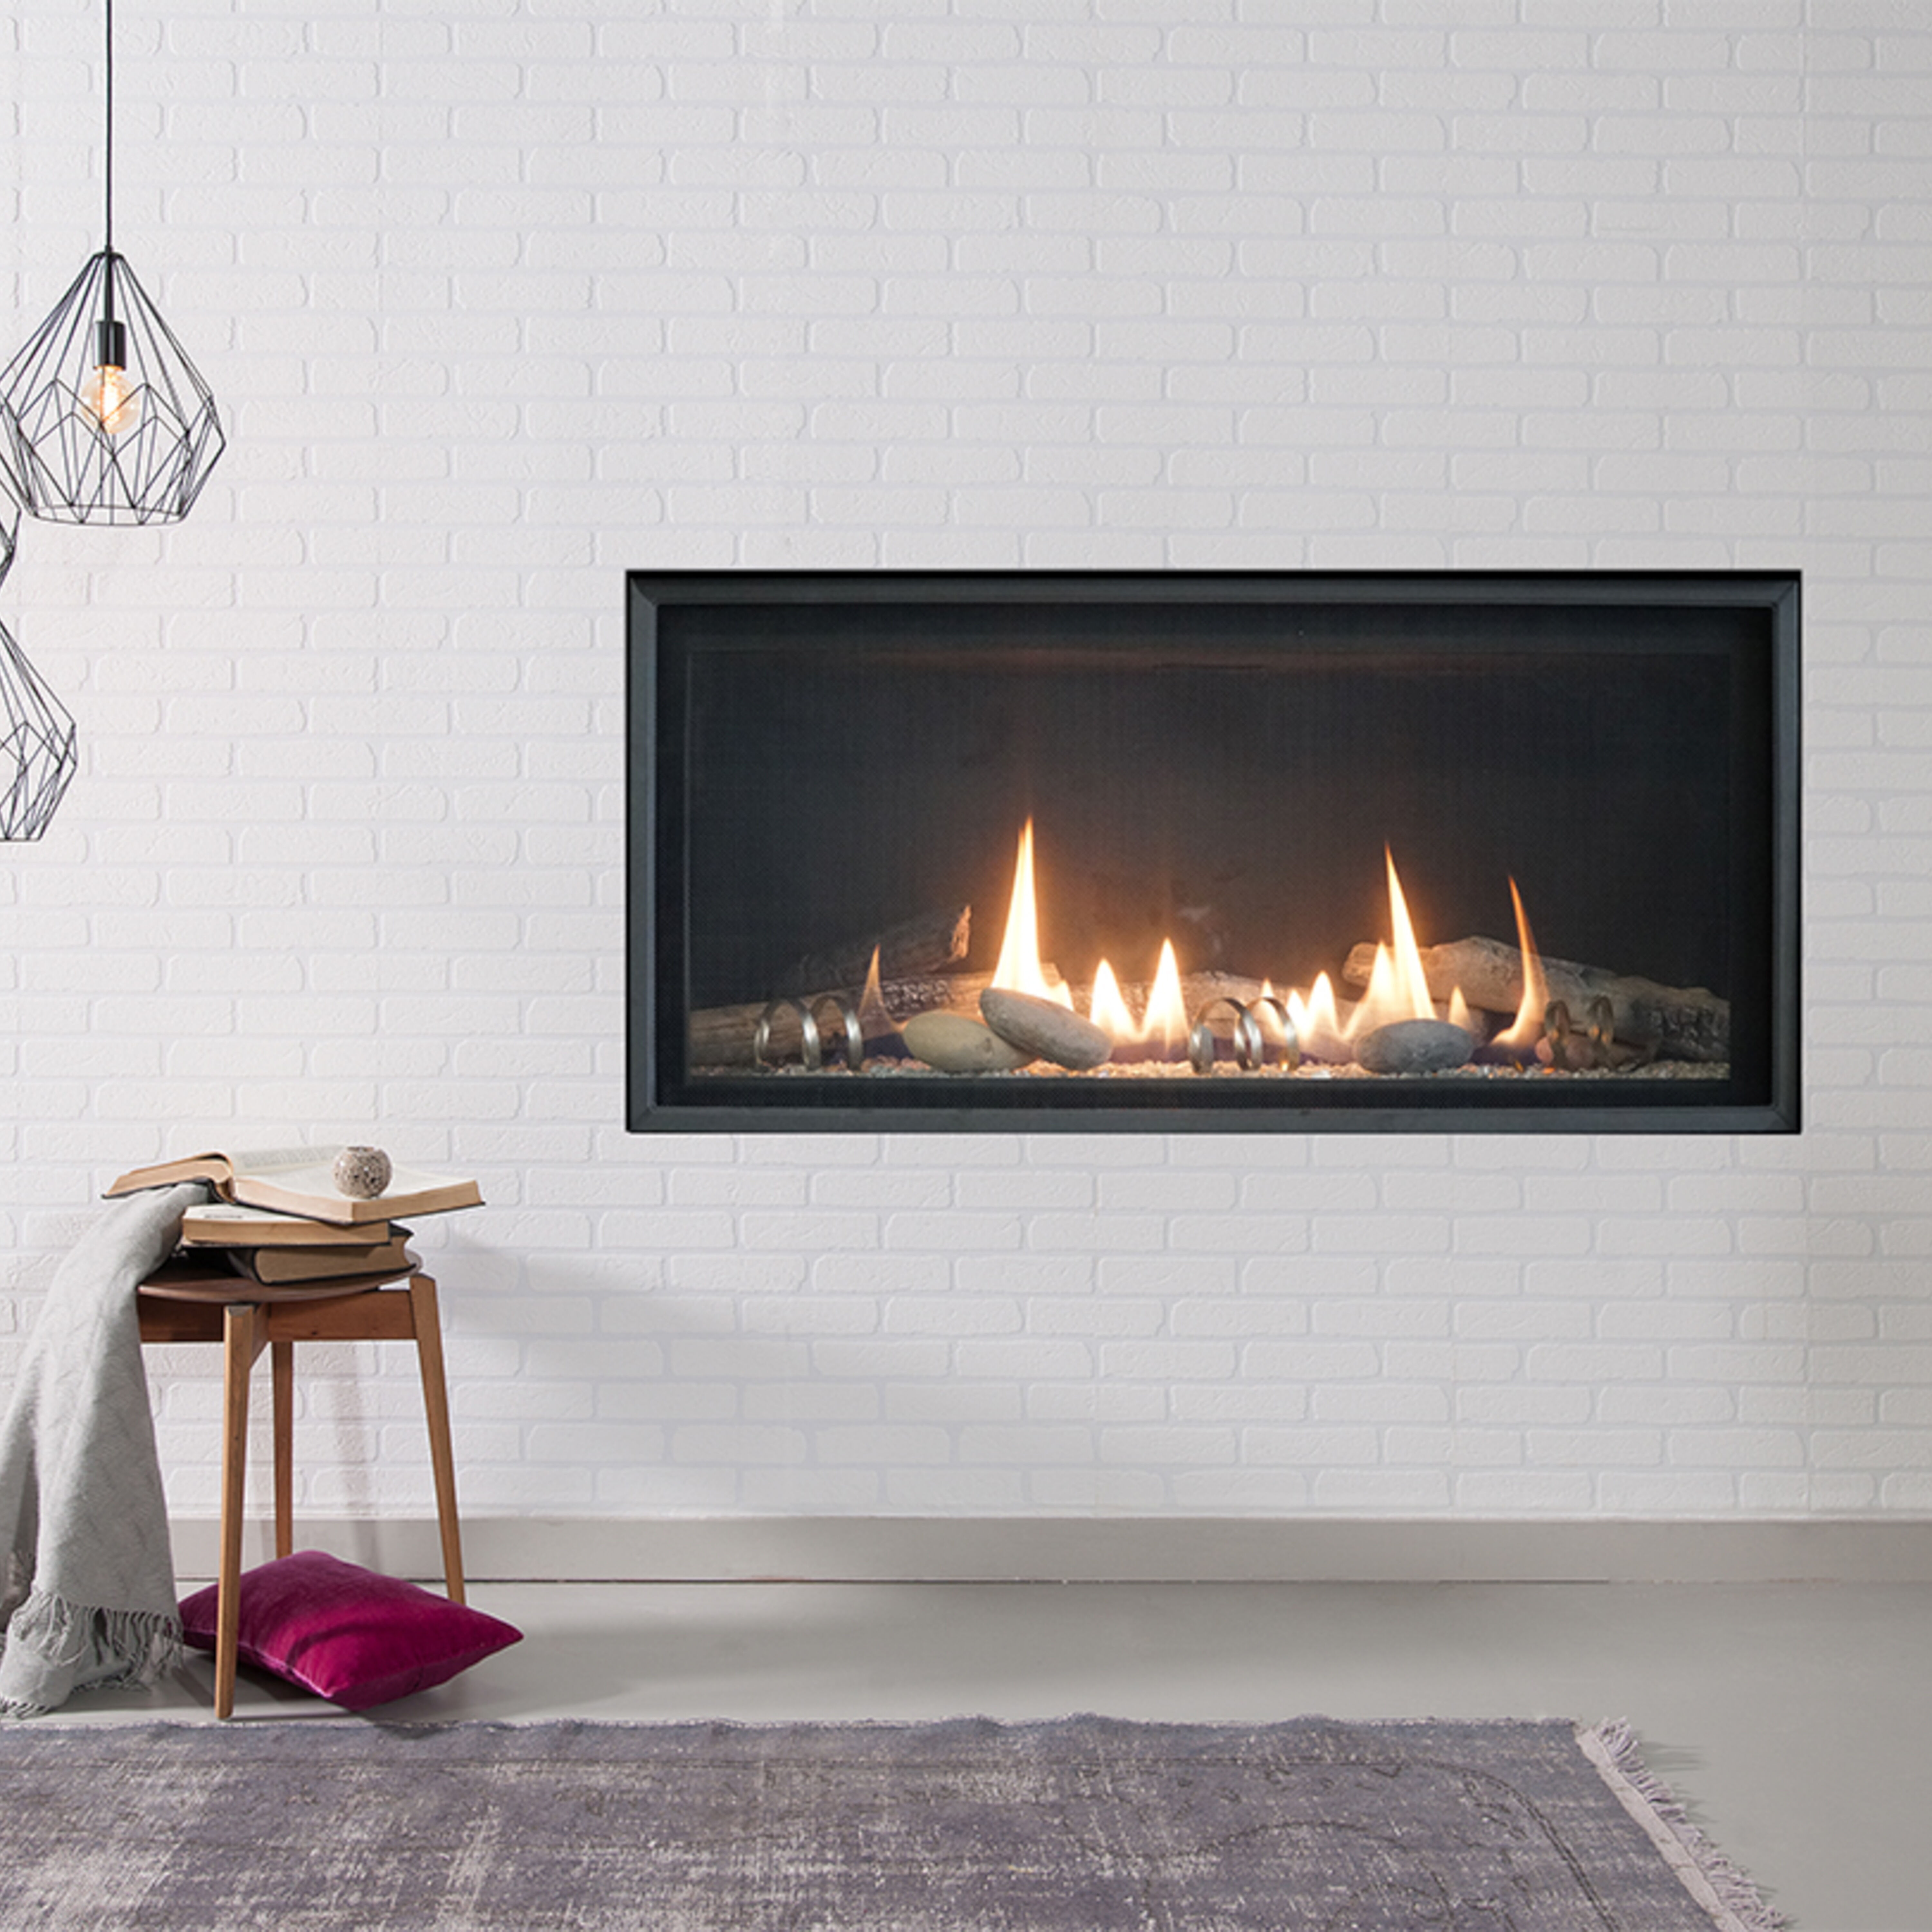 The Empire Loft Series Ventless Gas Fireplace installed on a white wall with modern, geometric and wood accents, a neutral colored rug, and red accent pillows.